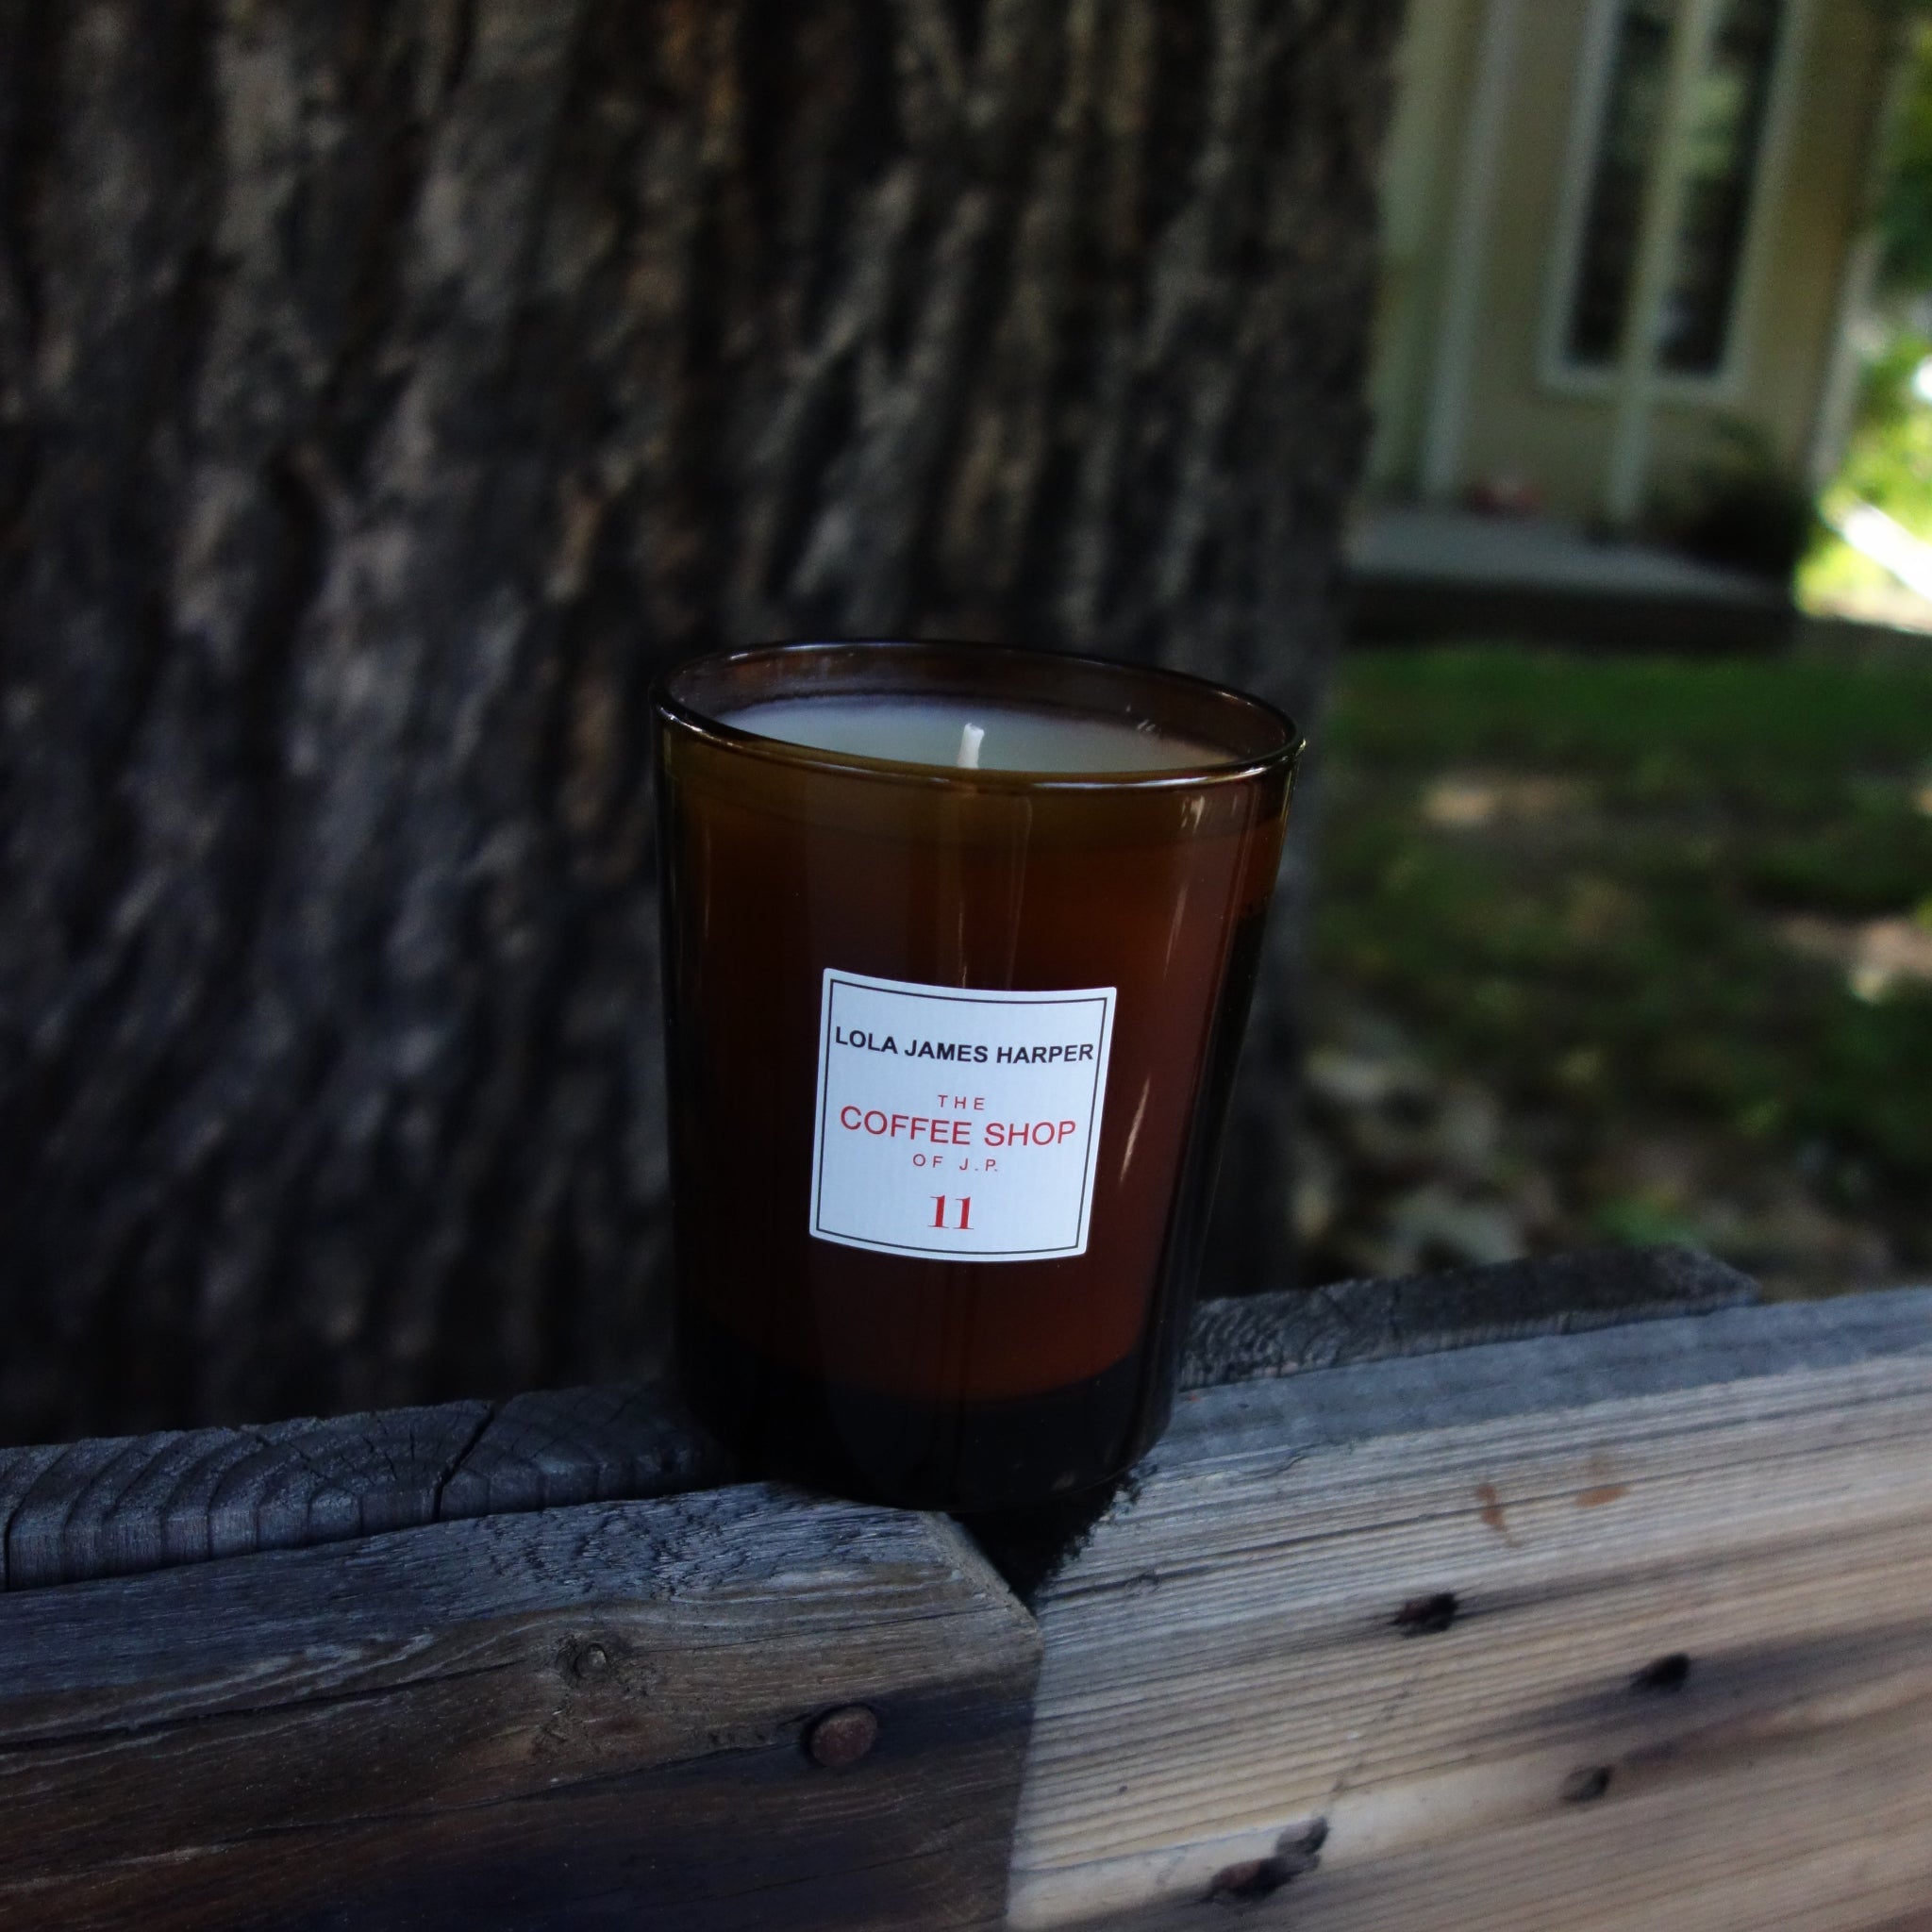 Pomme d'amour Candle – PERRIS STORE